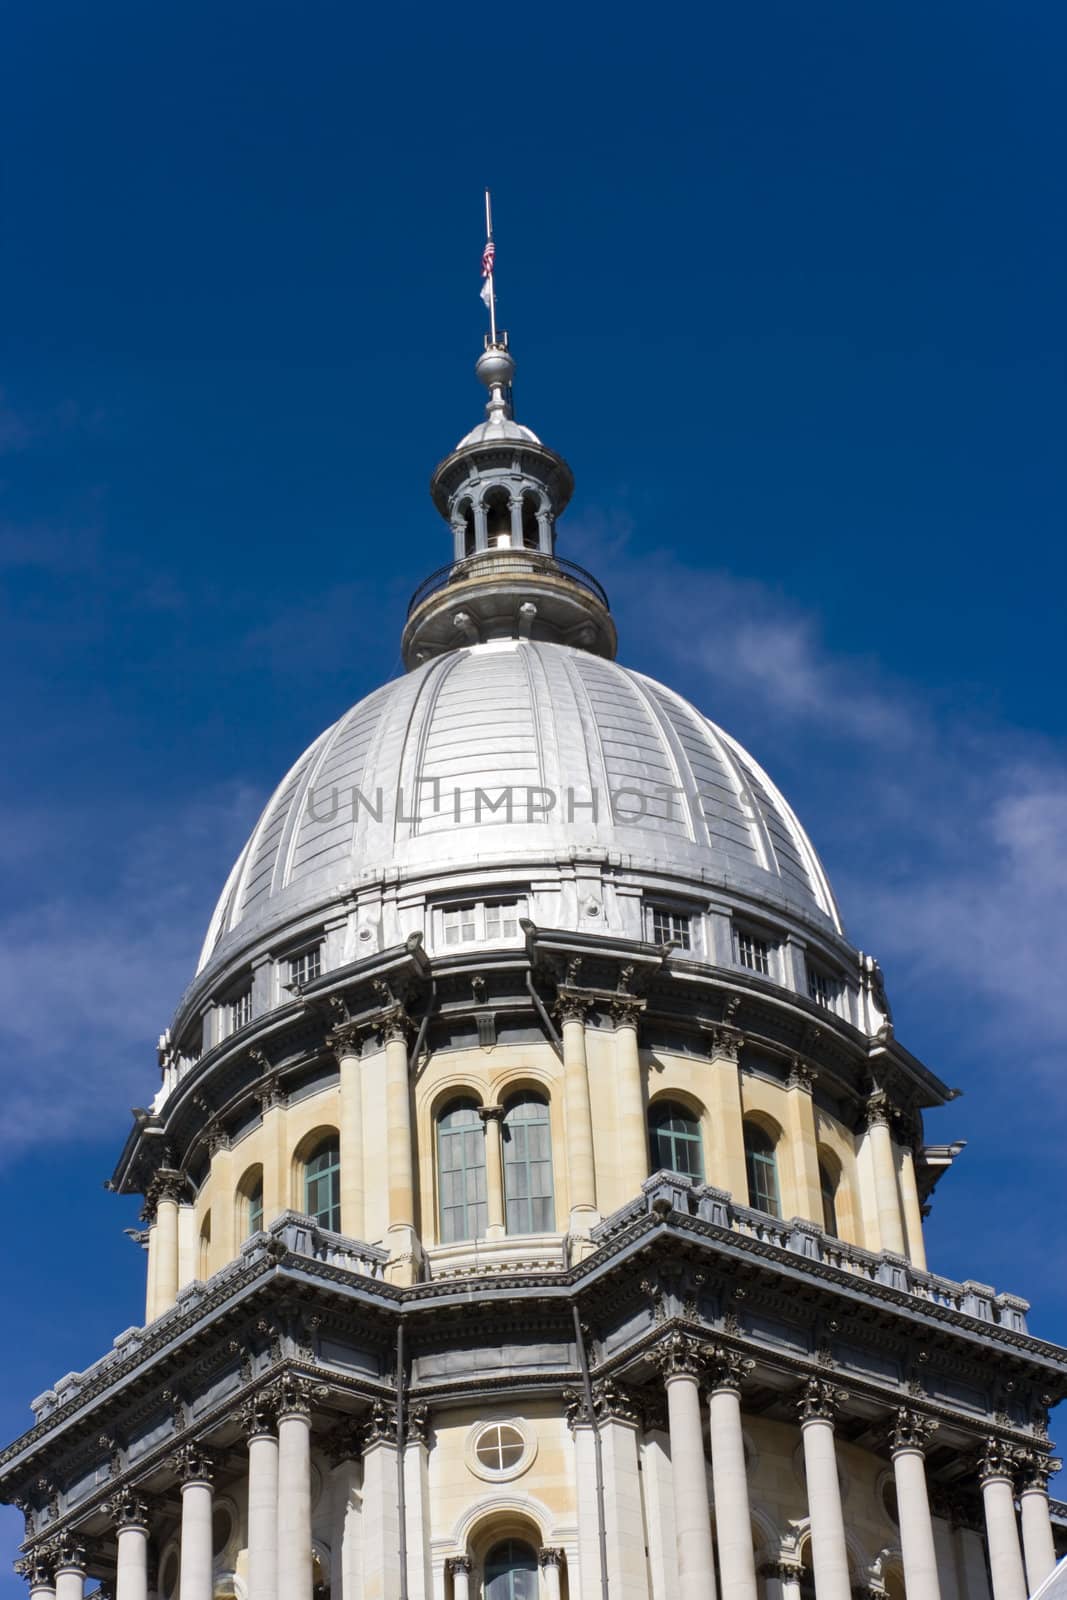 State Capitol of Illinois in Springfield.